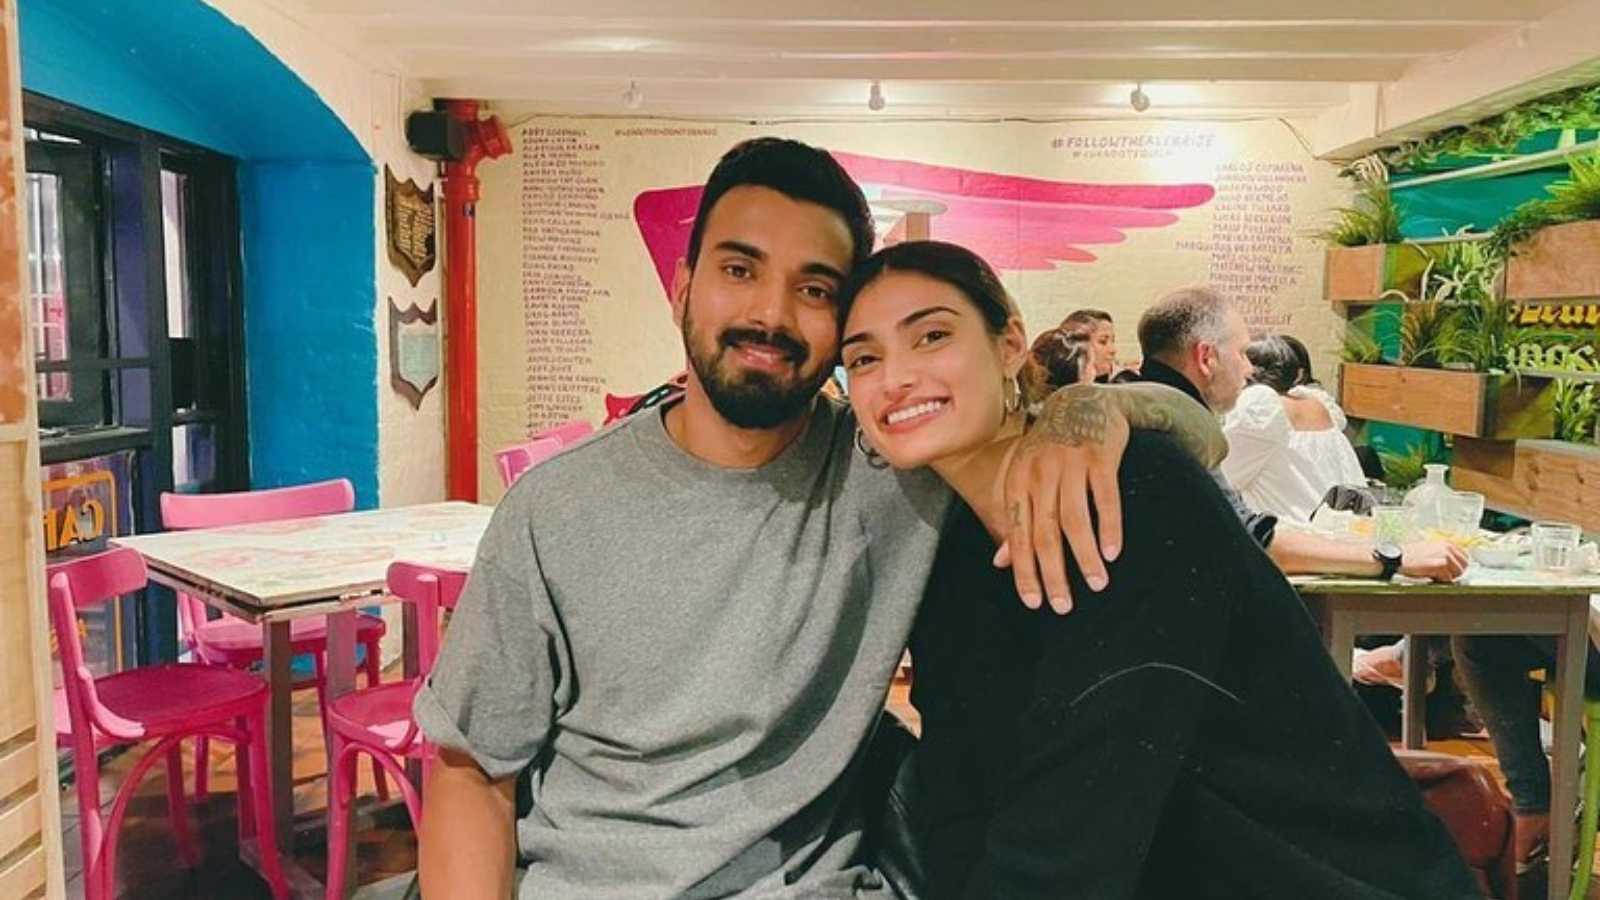 KL Rahul's 'personal leave' application with the BCCI gives away his wedding dates with girlfriend Athiya Shetty